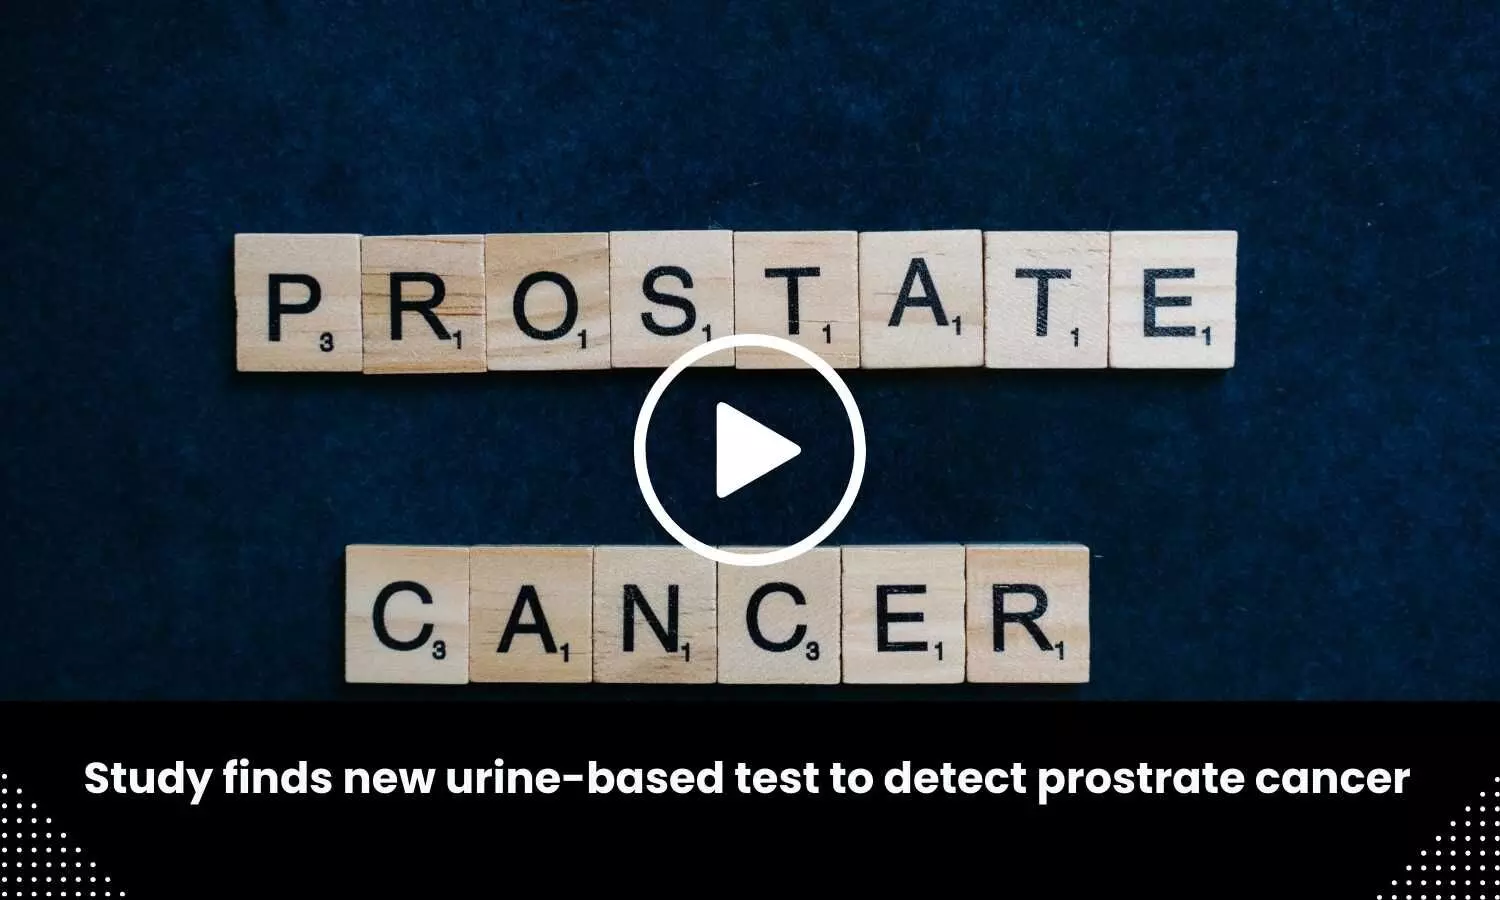 Study finds new urine-based test to detect prostrate cancer